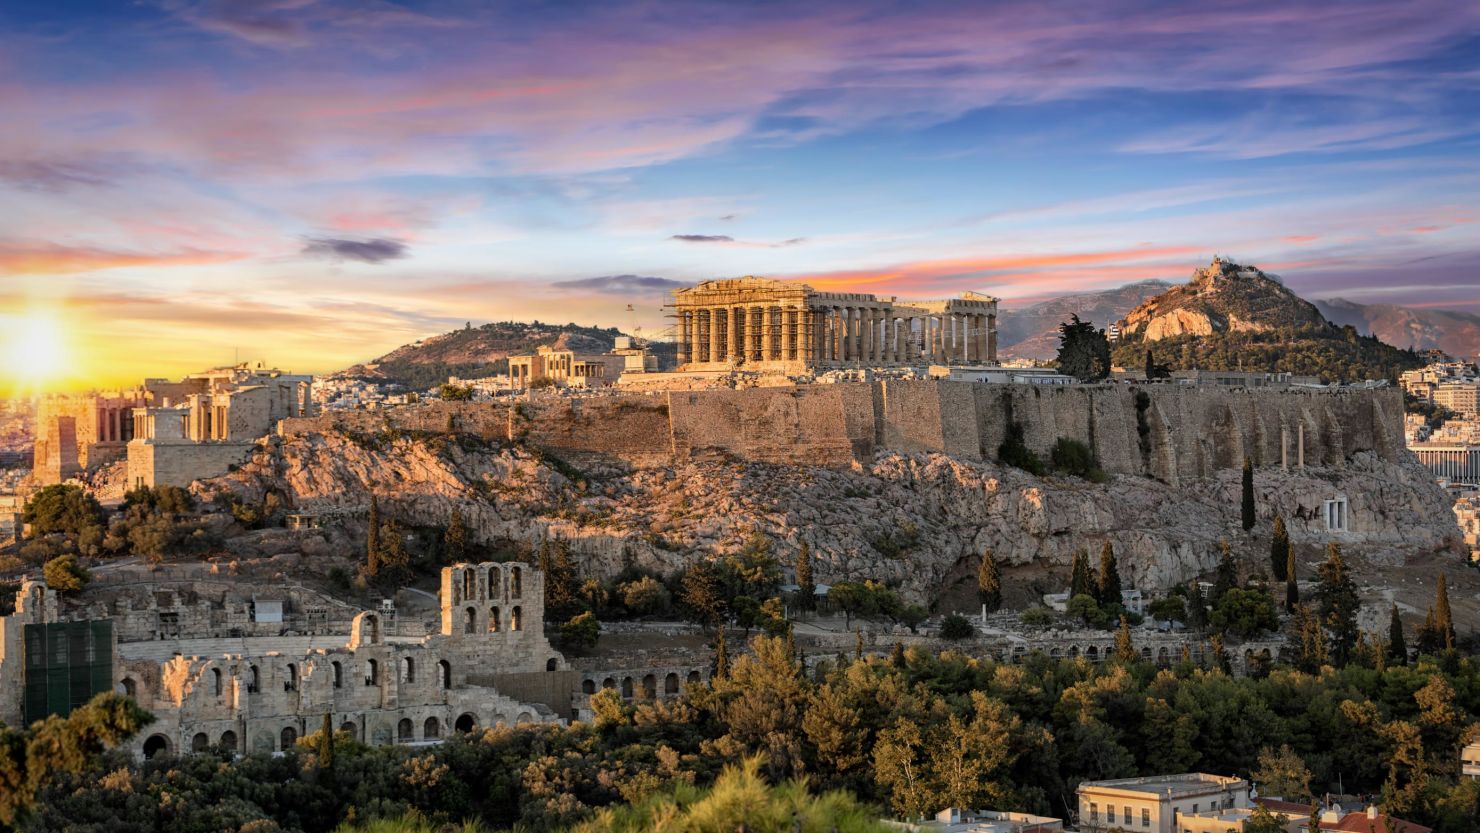 Greece has ancient ruins like the Parthenon, plus some of Europe's loveliest islands.